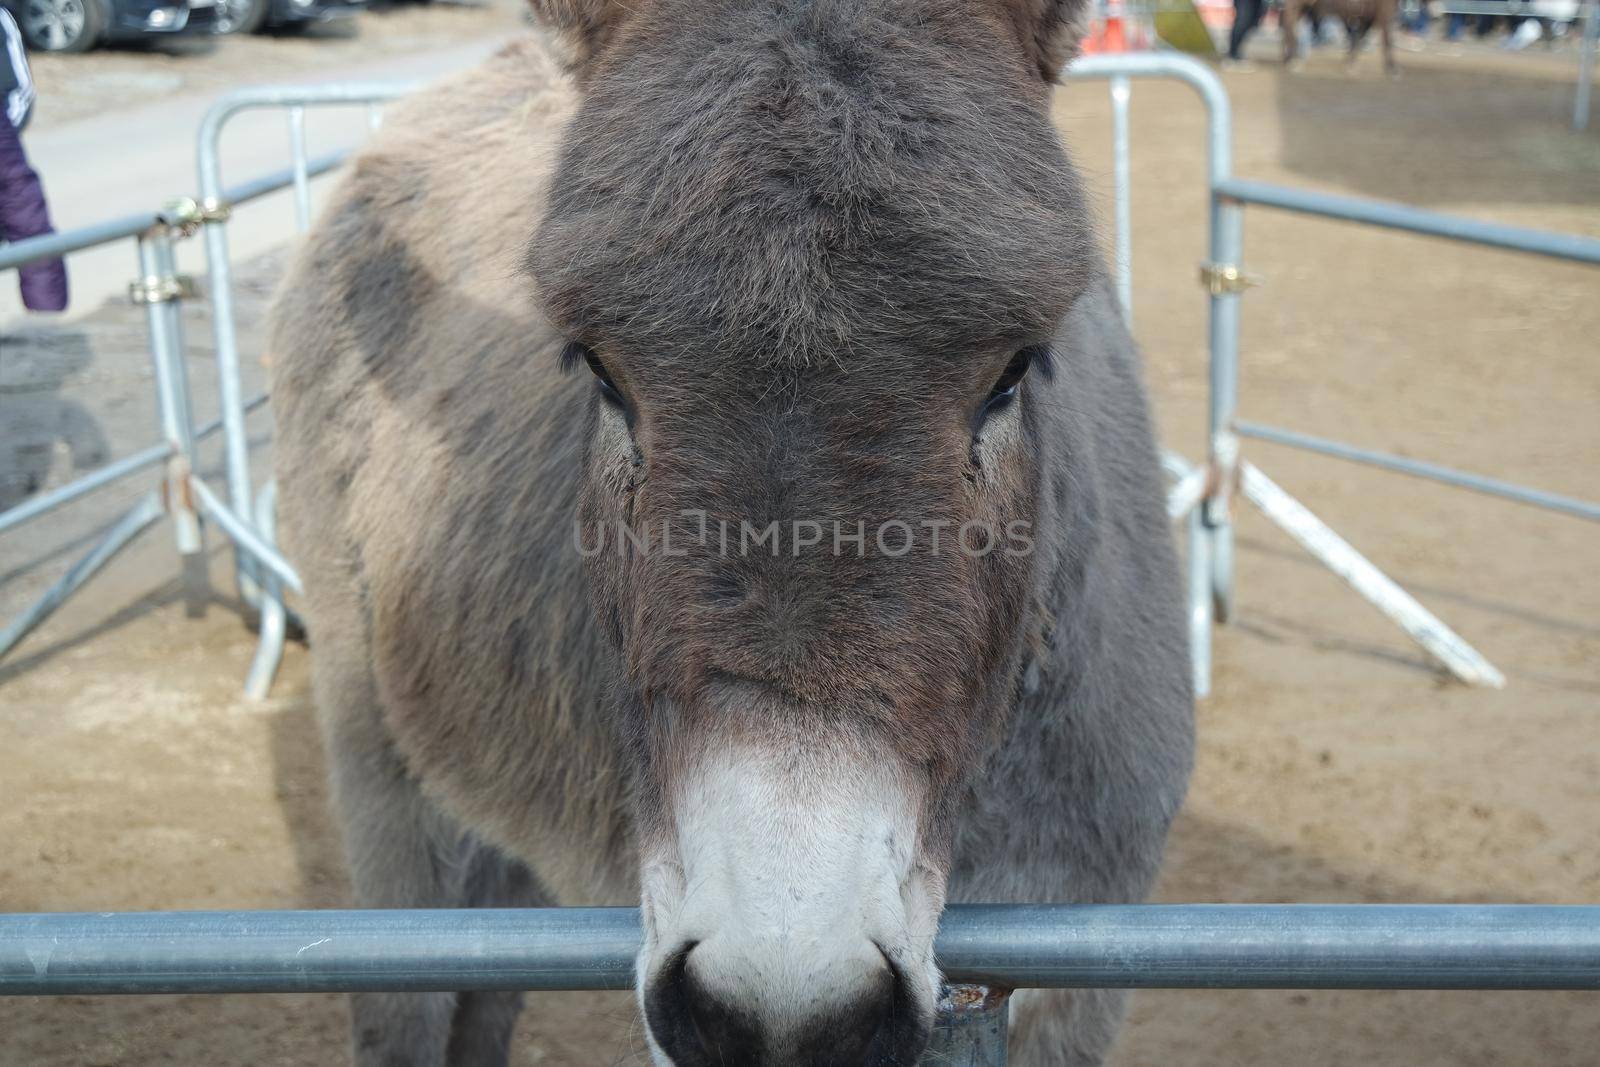 Brown donkey face with big eyes and large ears looking at camera standing inside a fence. Close-up on a donkey head profile in a natural environment in day time.